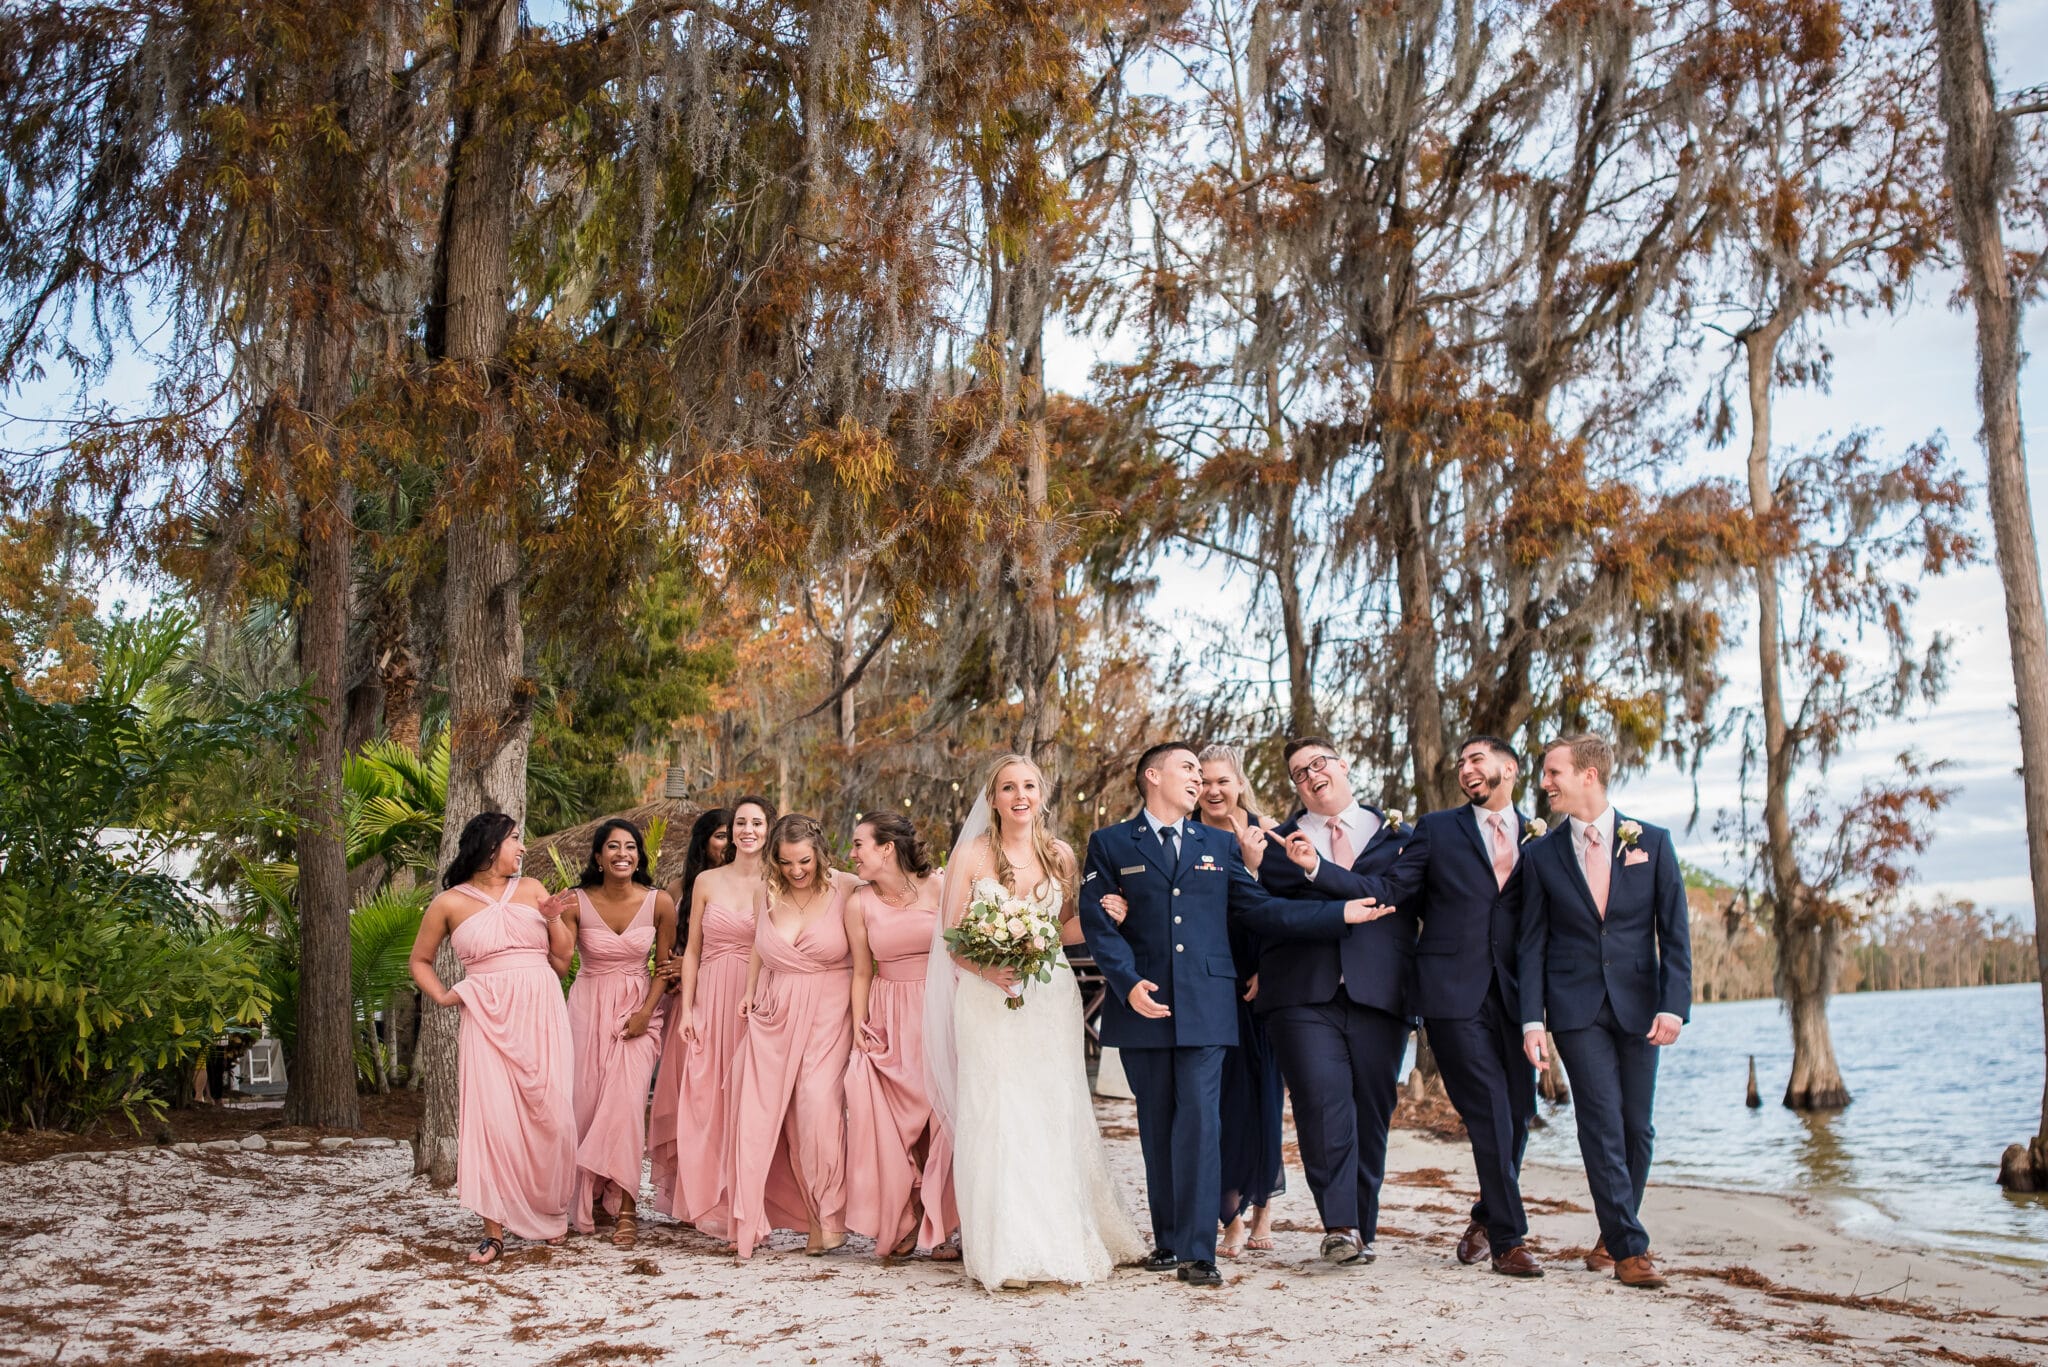 wedding party standing under trees on beach